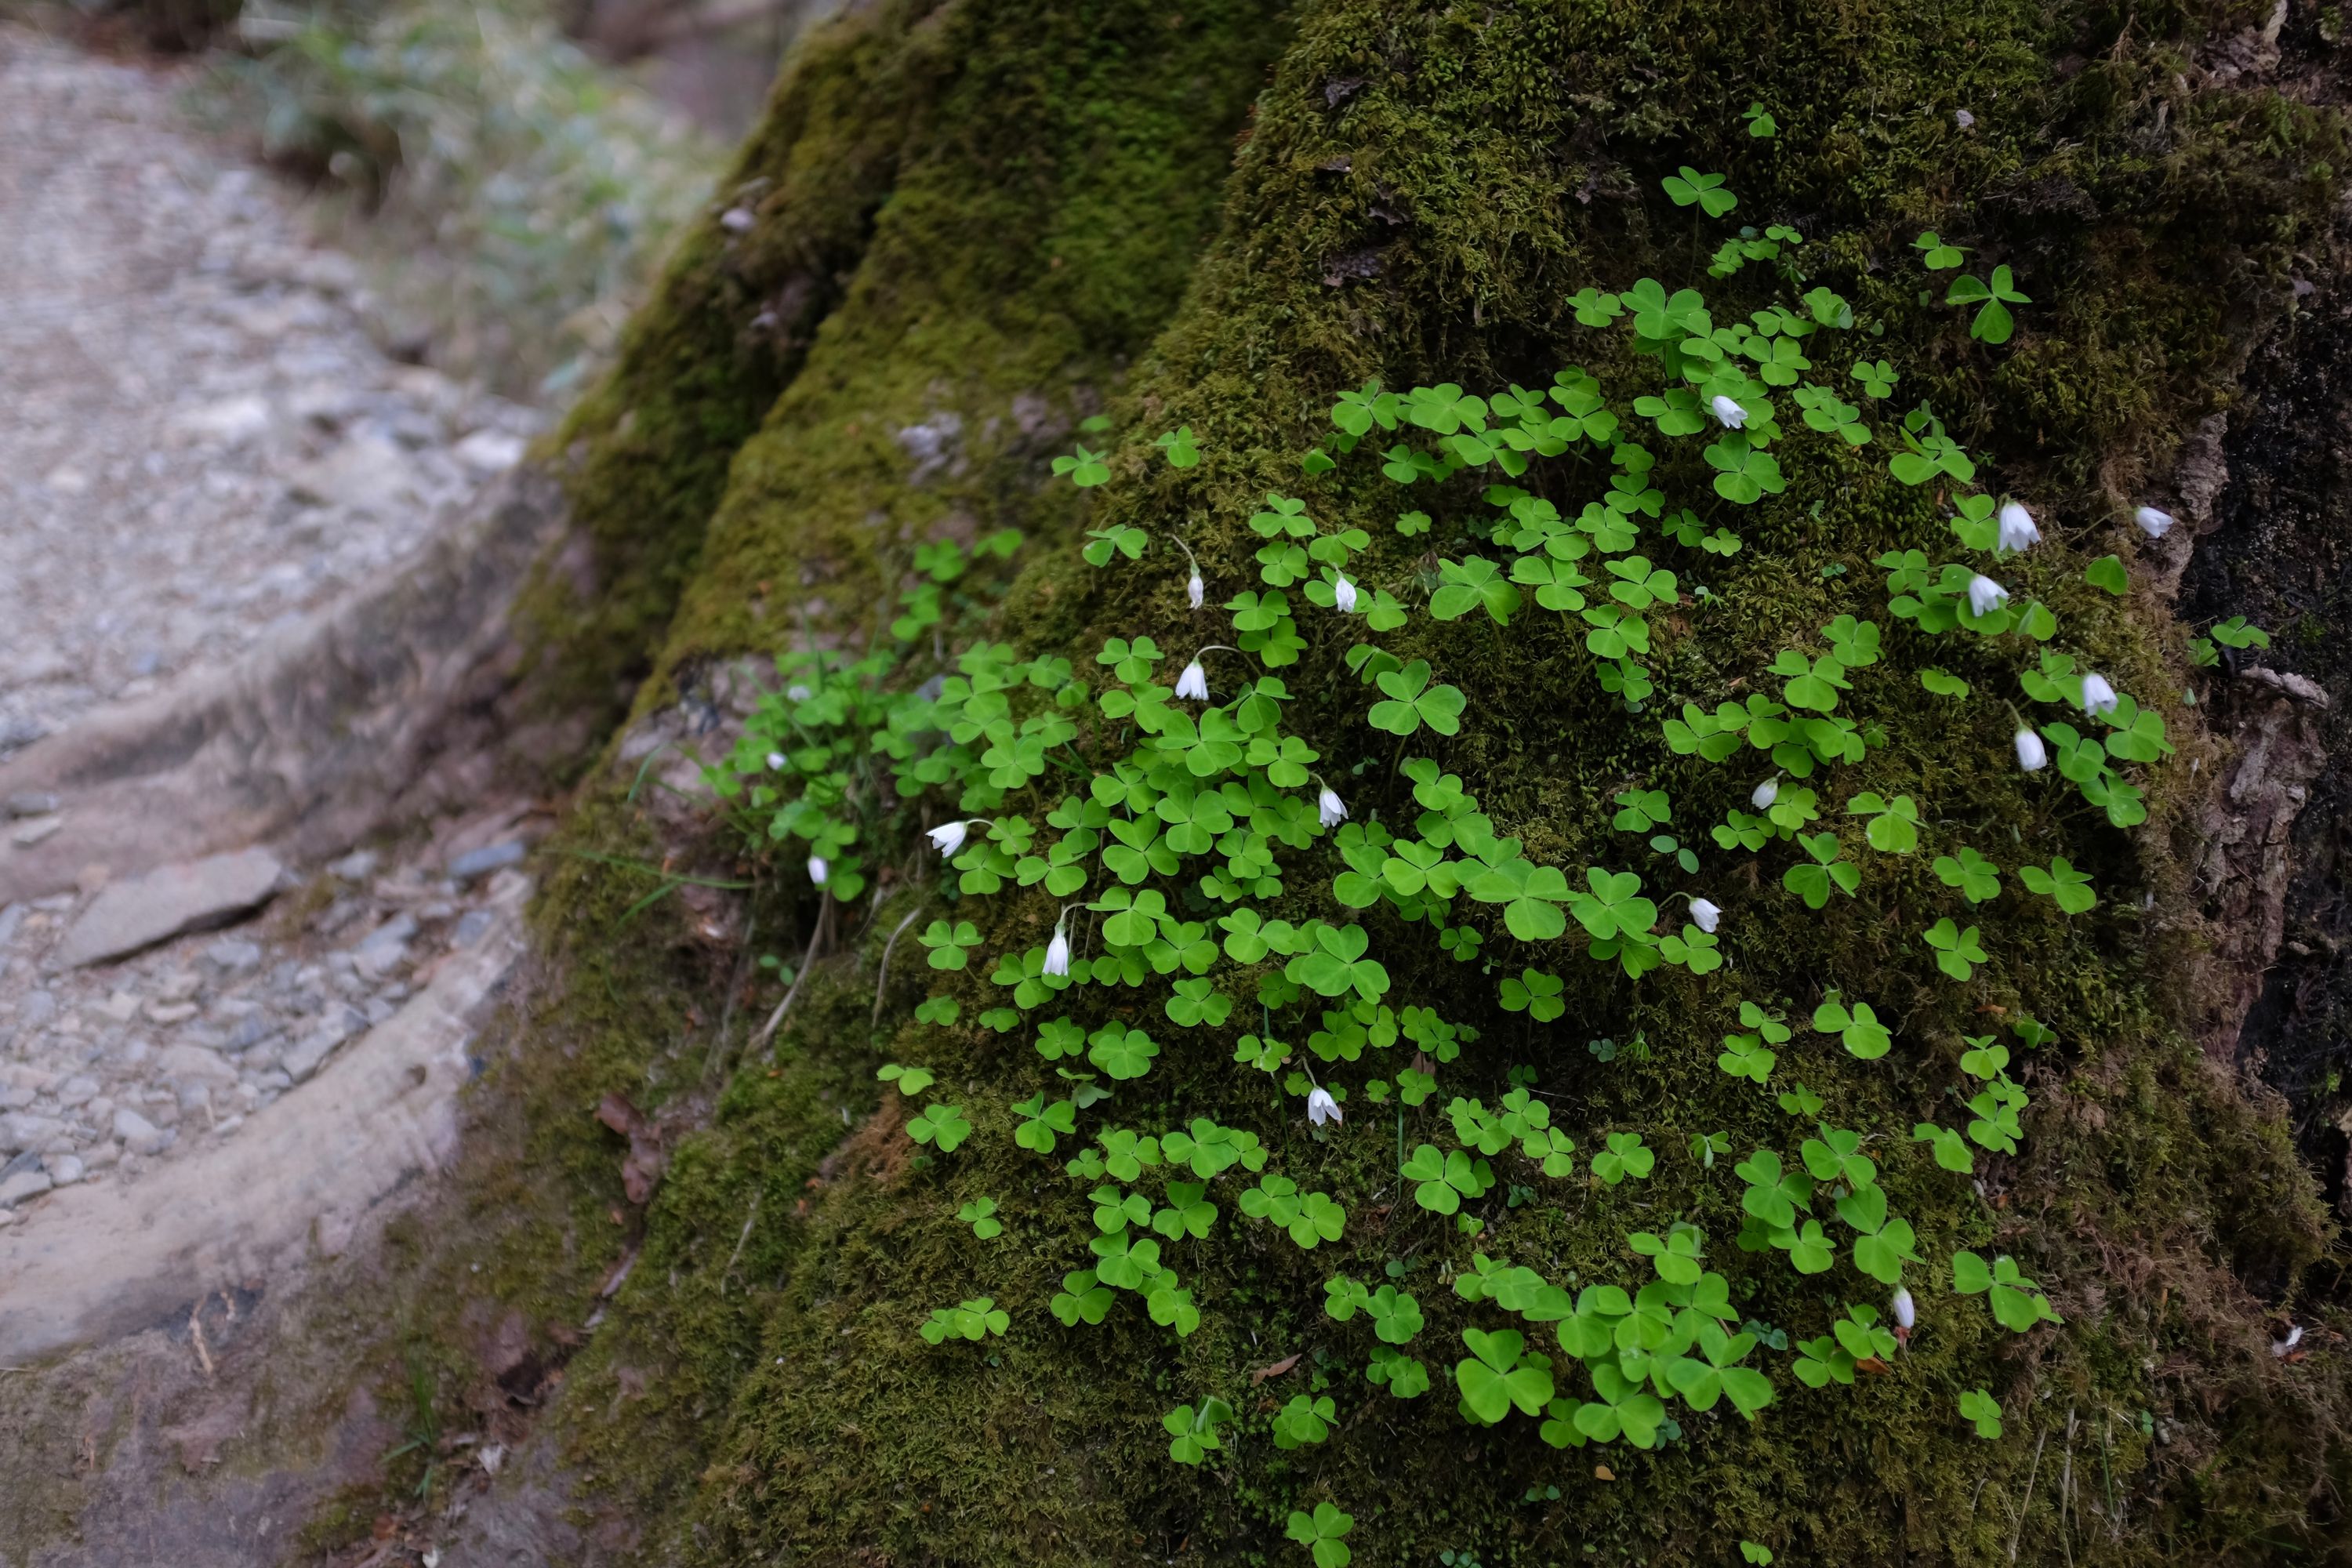 Clover and small white-pink flowers grow on the moss-covered trunk of a tree.